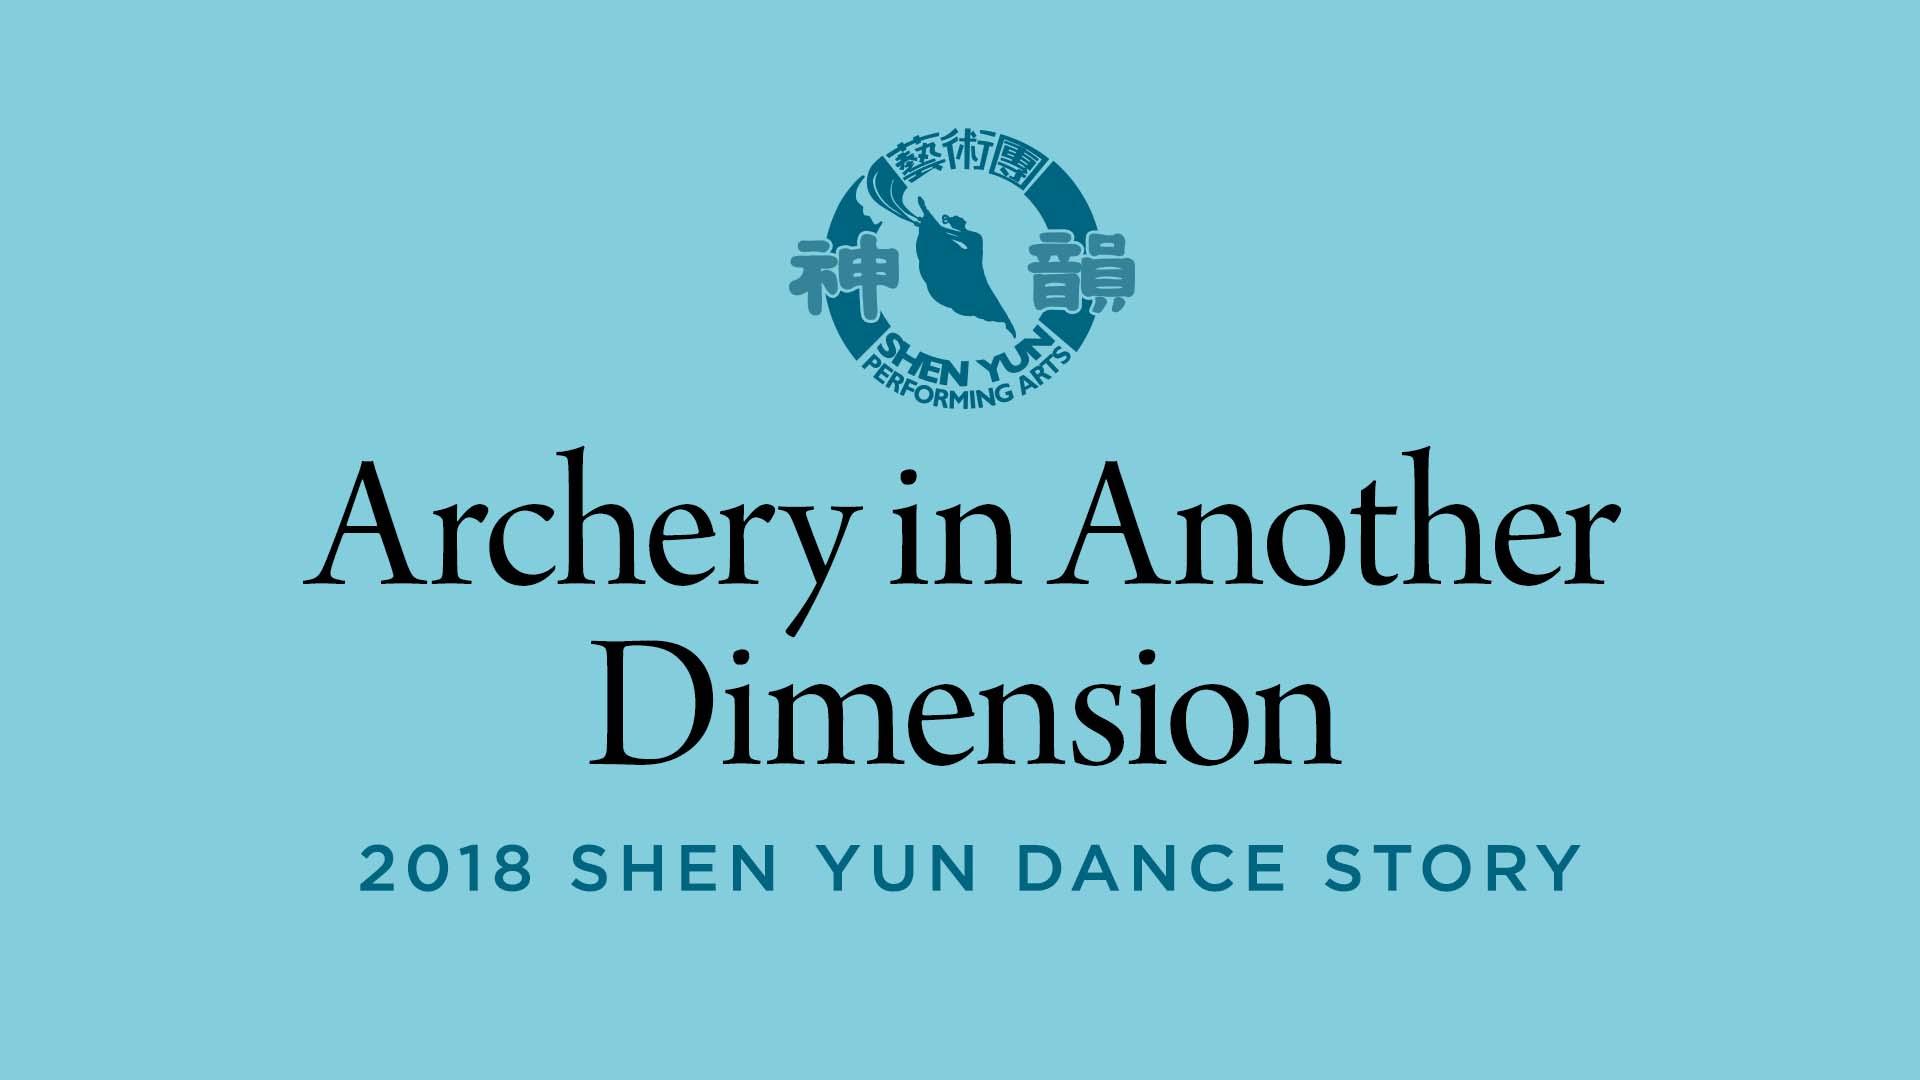 Archery in Another Dimension